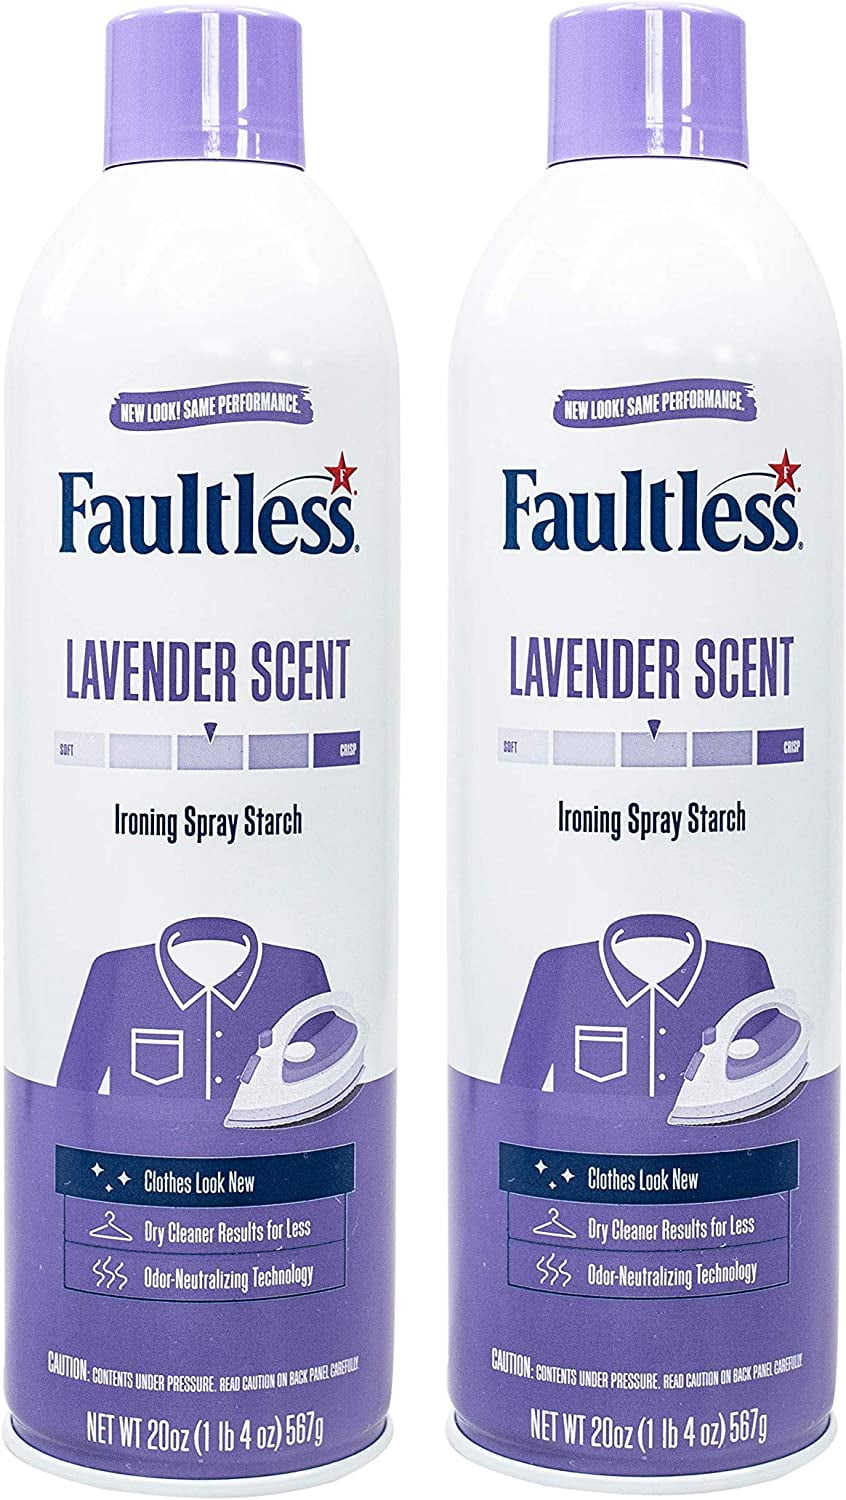 Laundry Starch Spray, Faultless Lavender Spray Starch 20 oz Cans